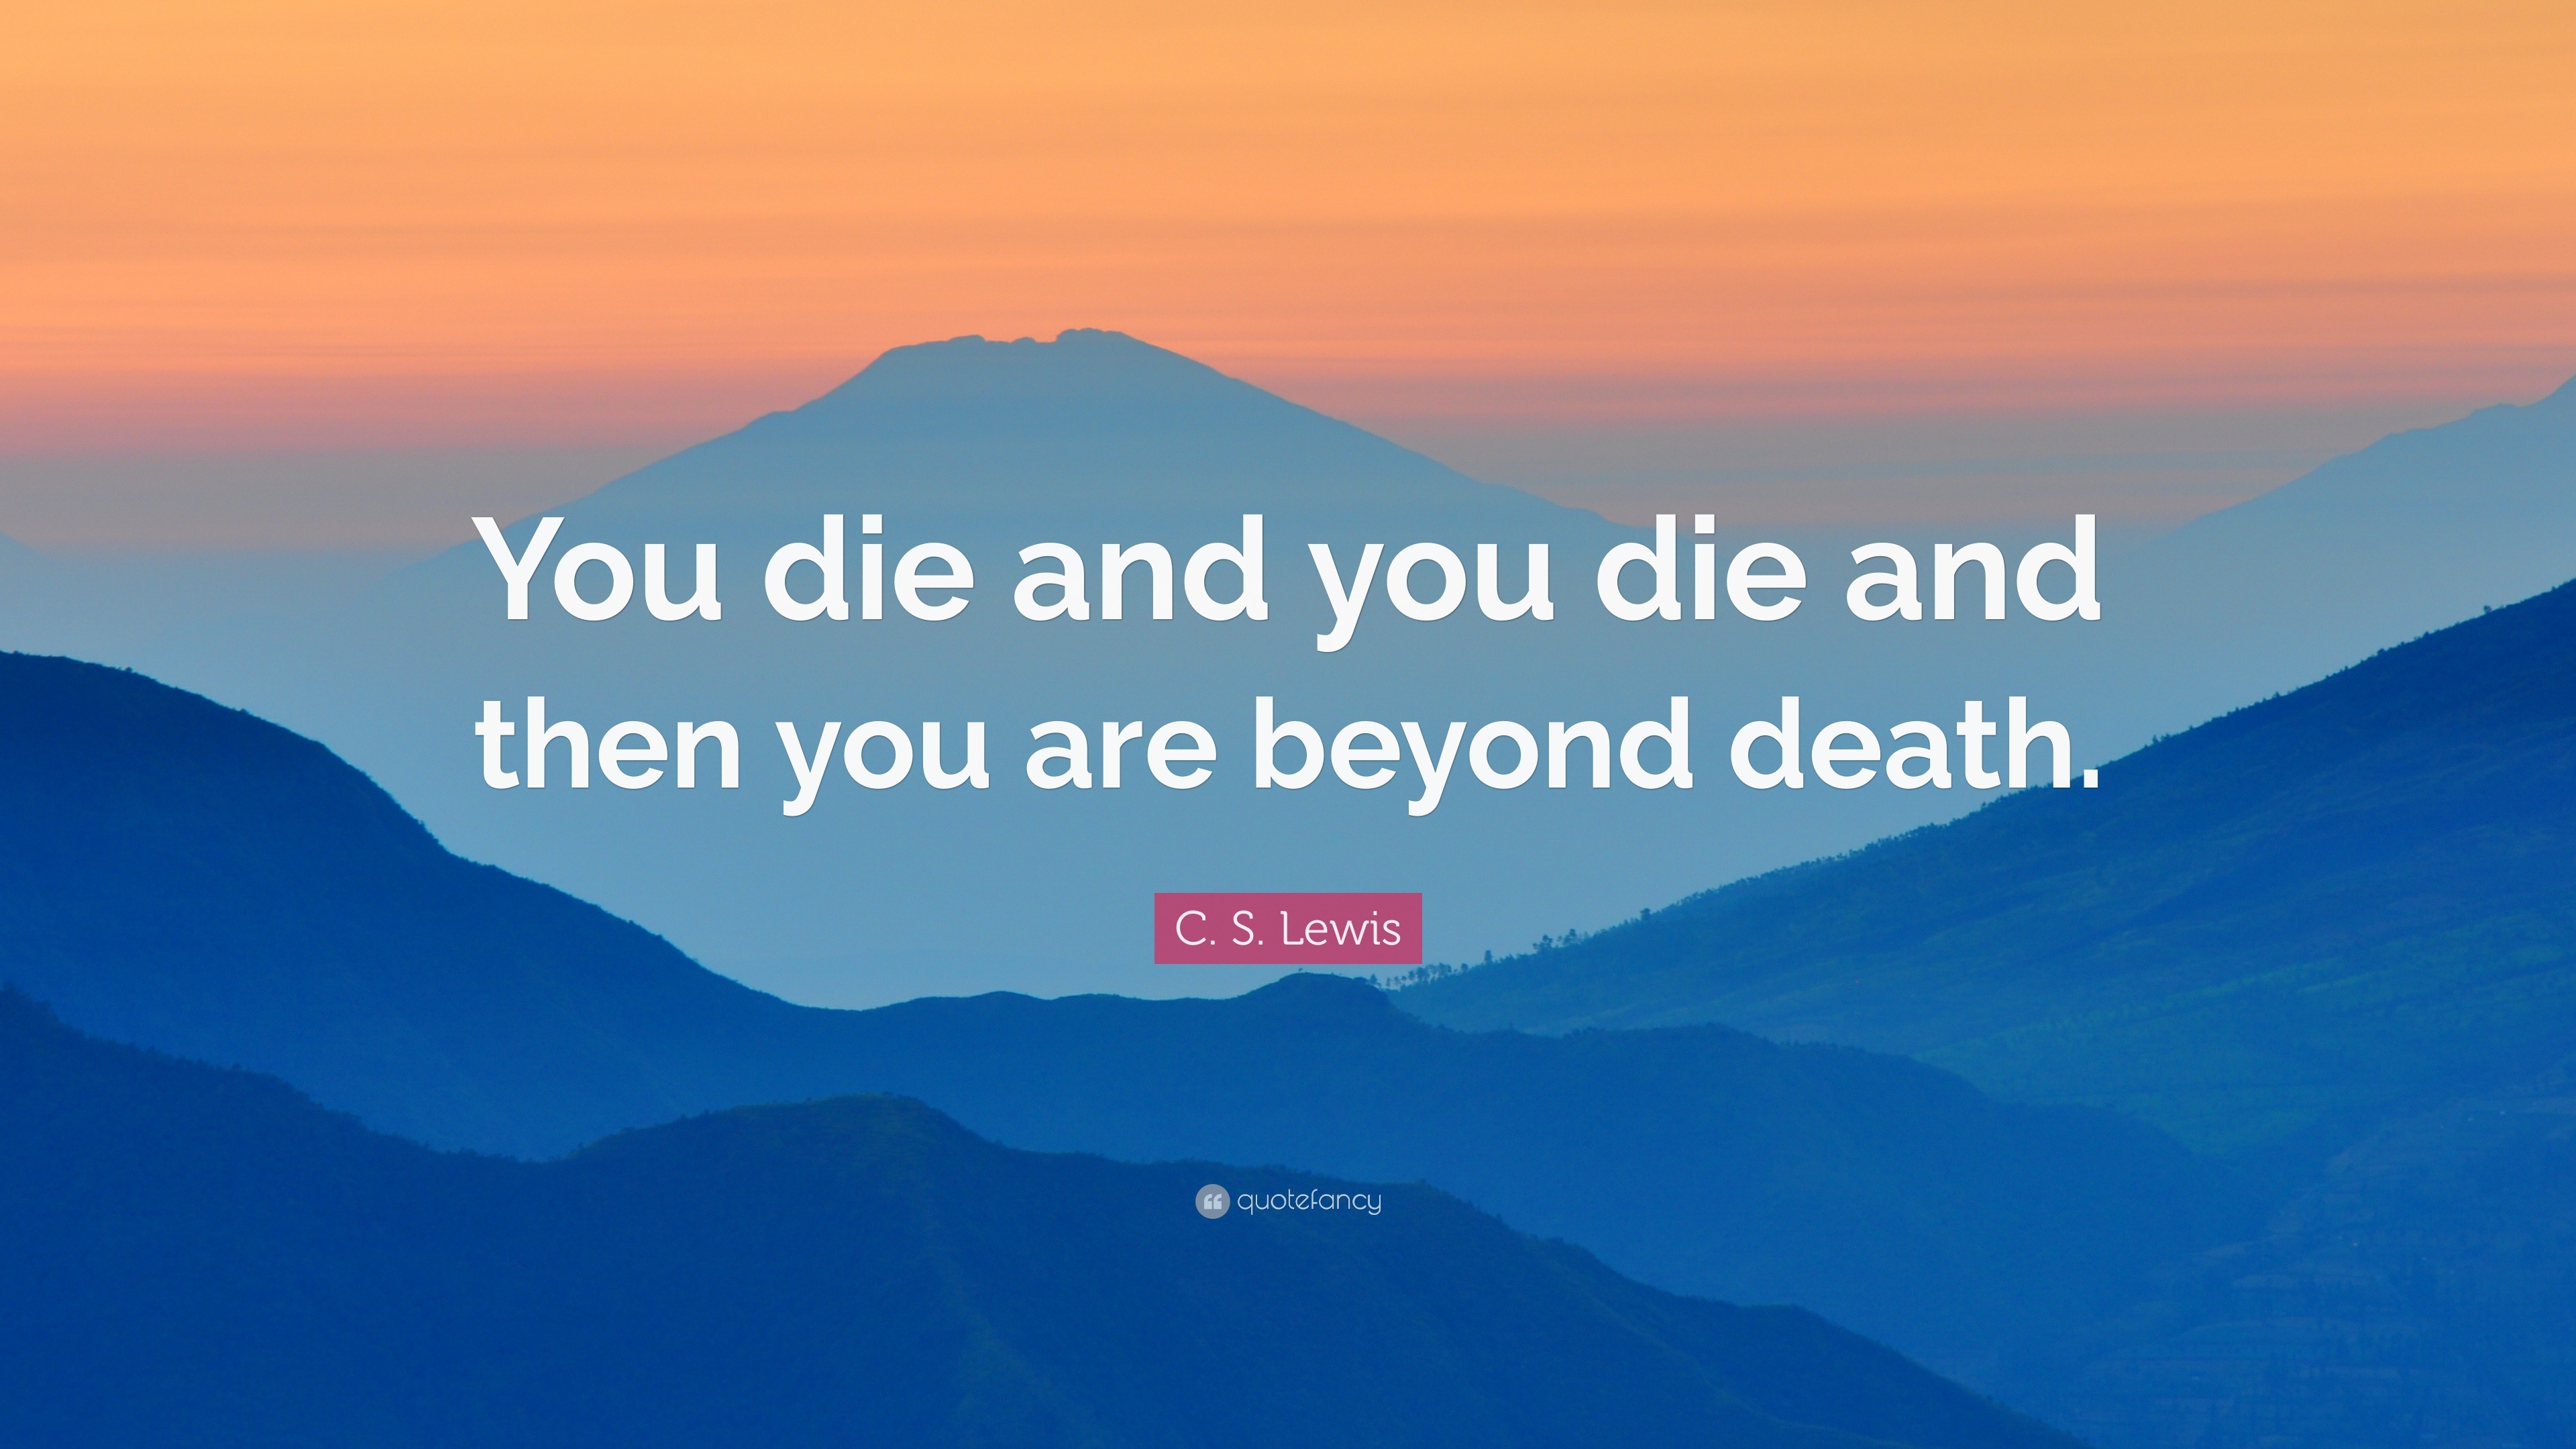 C. S. Lewis Quote: “You die and you die and then you are beyond death.”